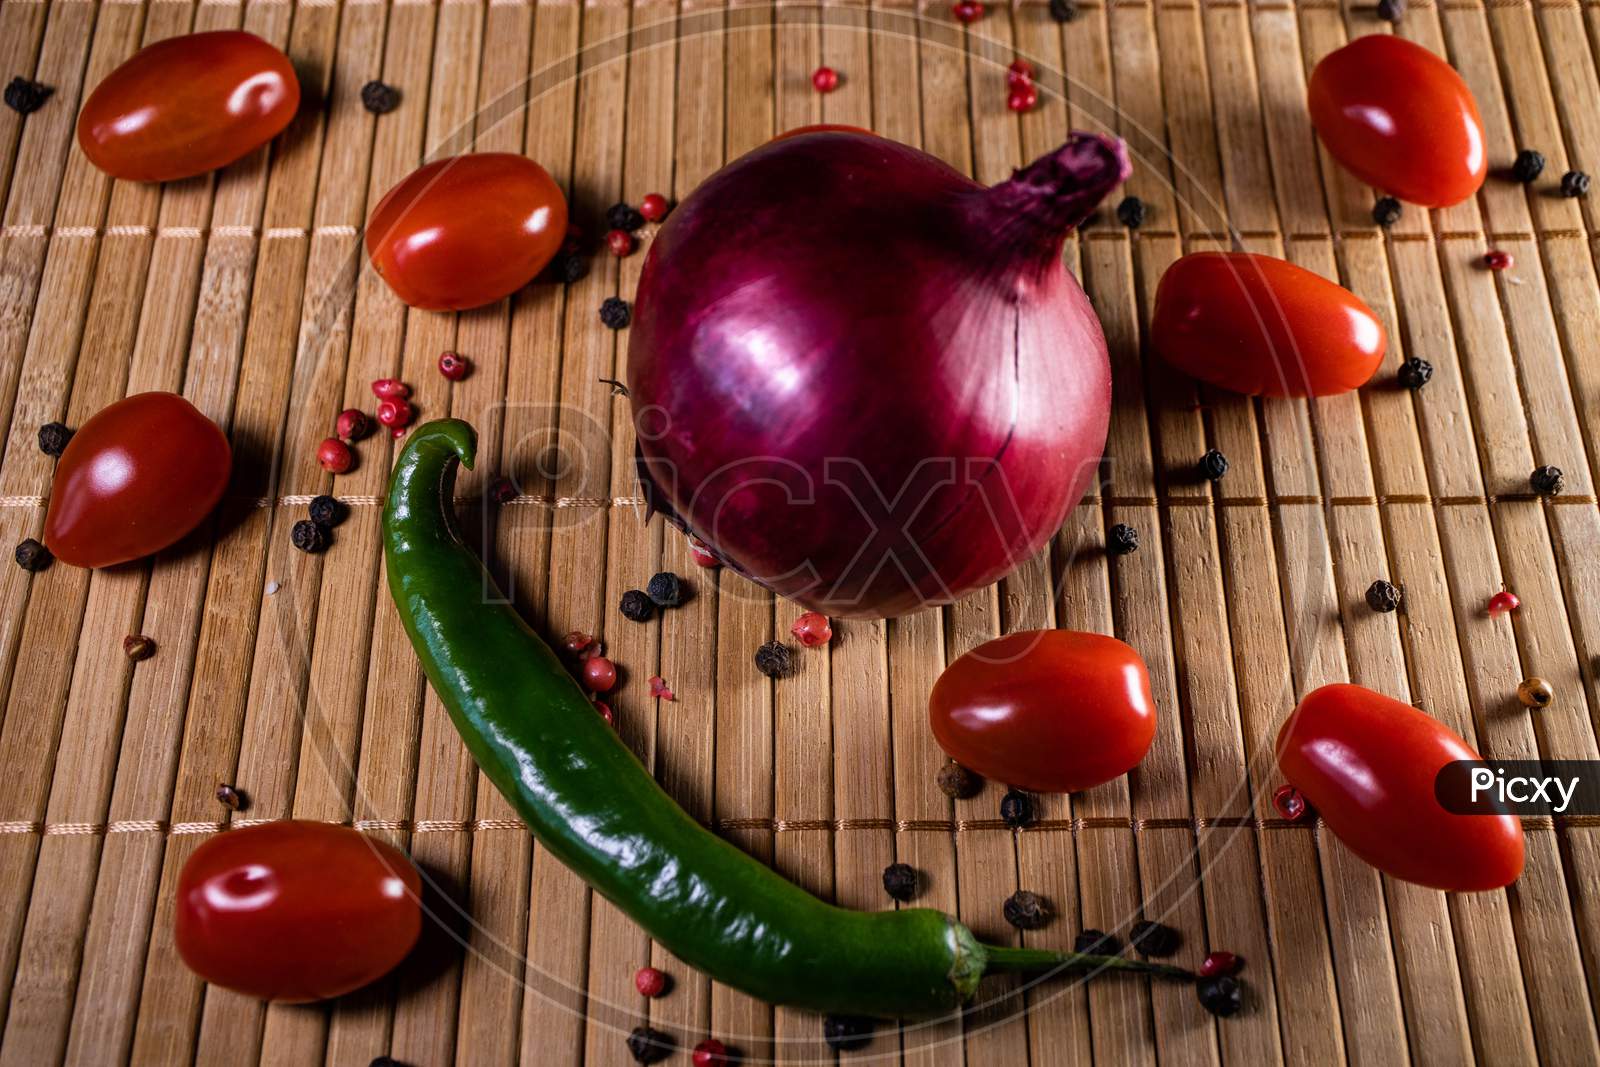 Chilli Pepper An Cherry Tomatoes Background.